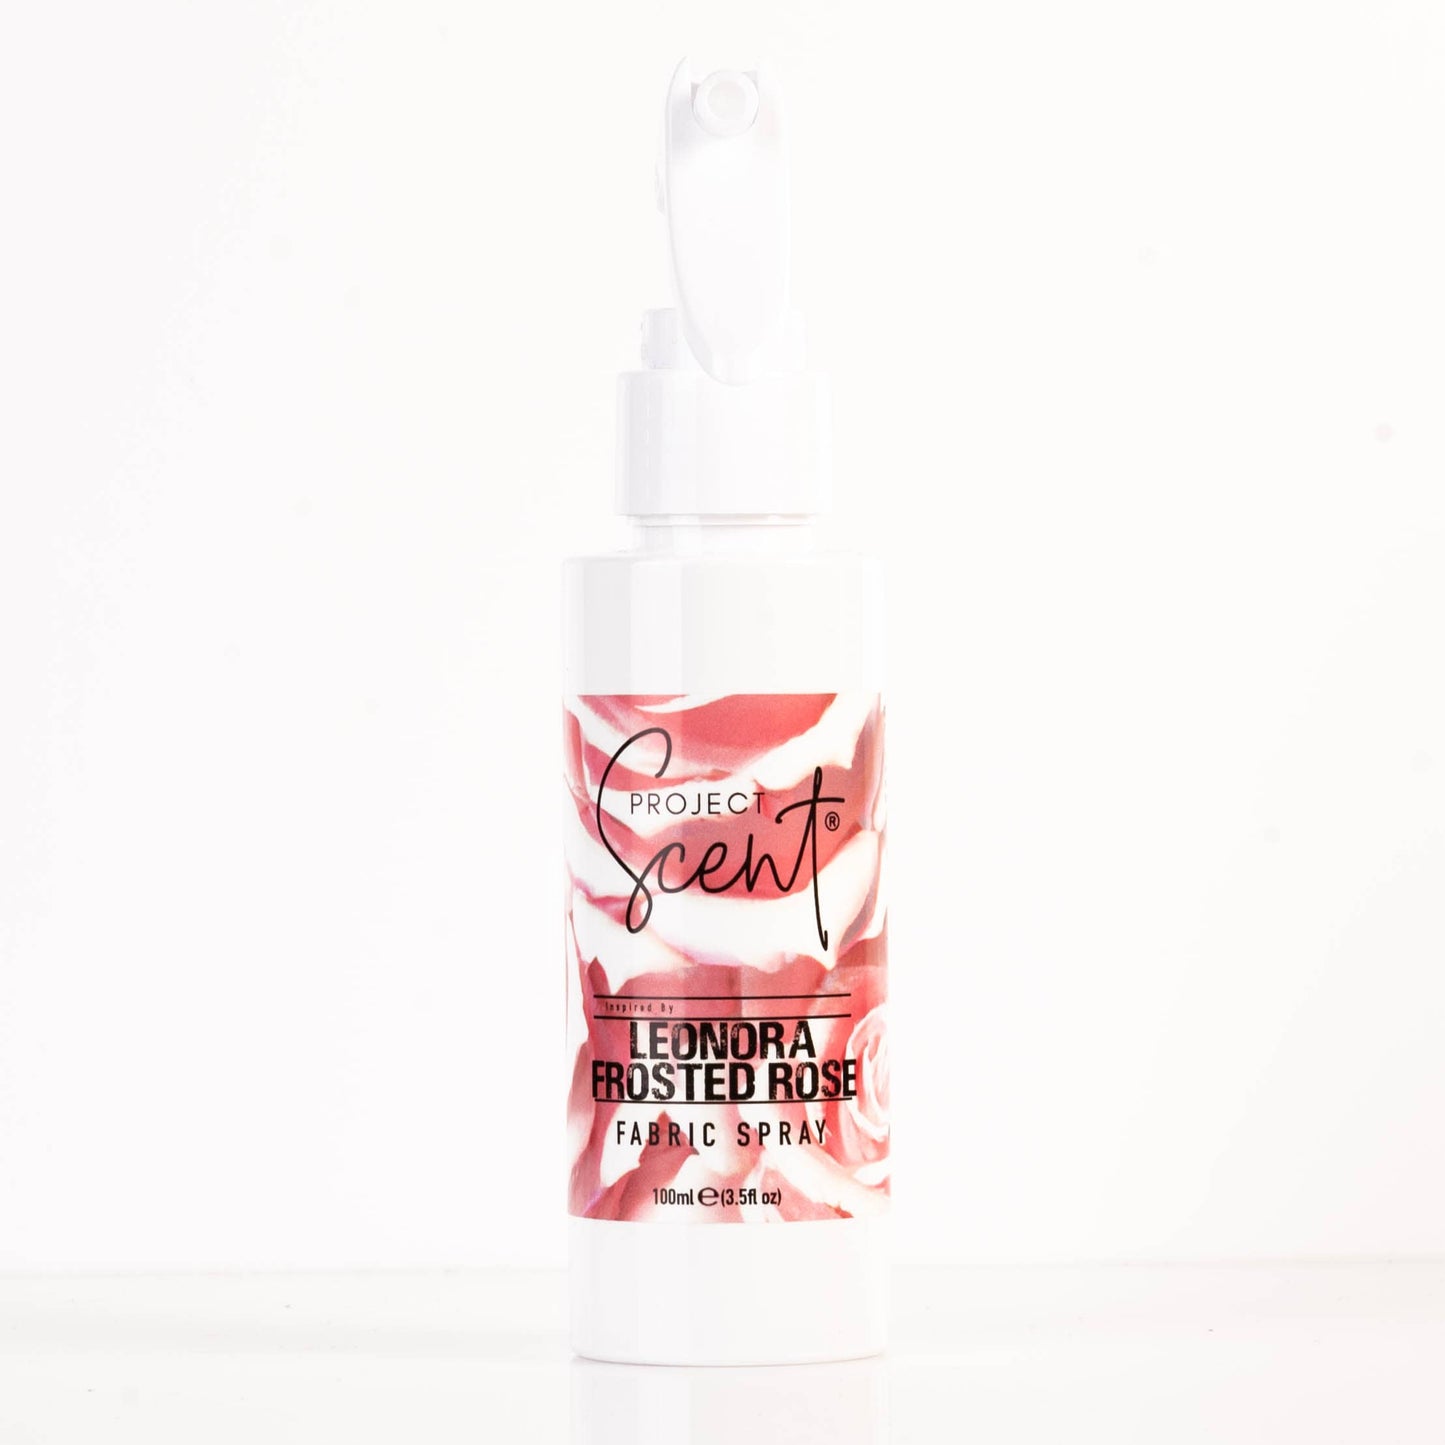 New Project Scent Fabric Spray 100ml